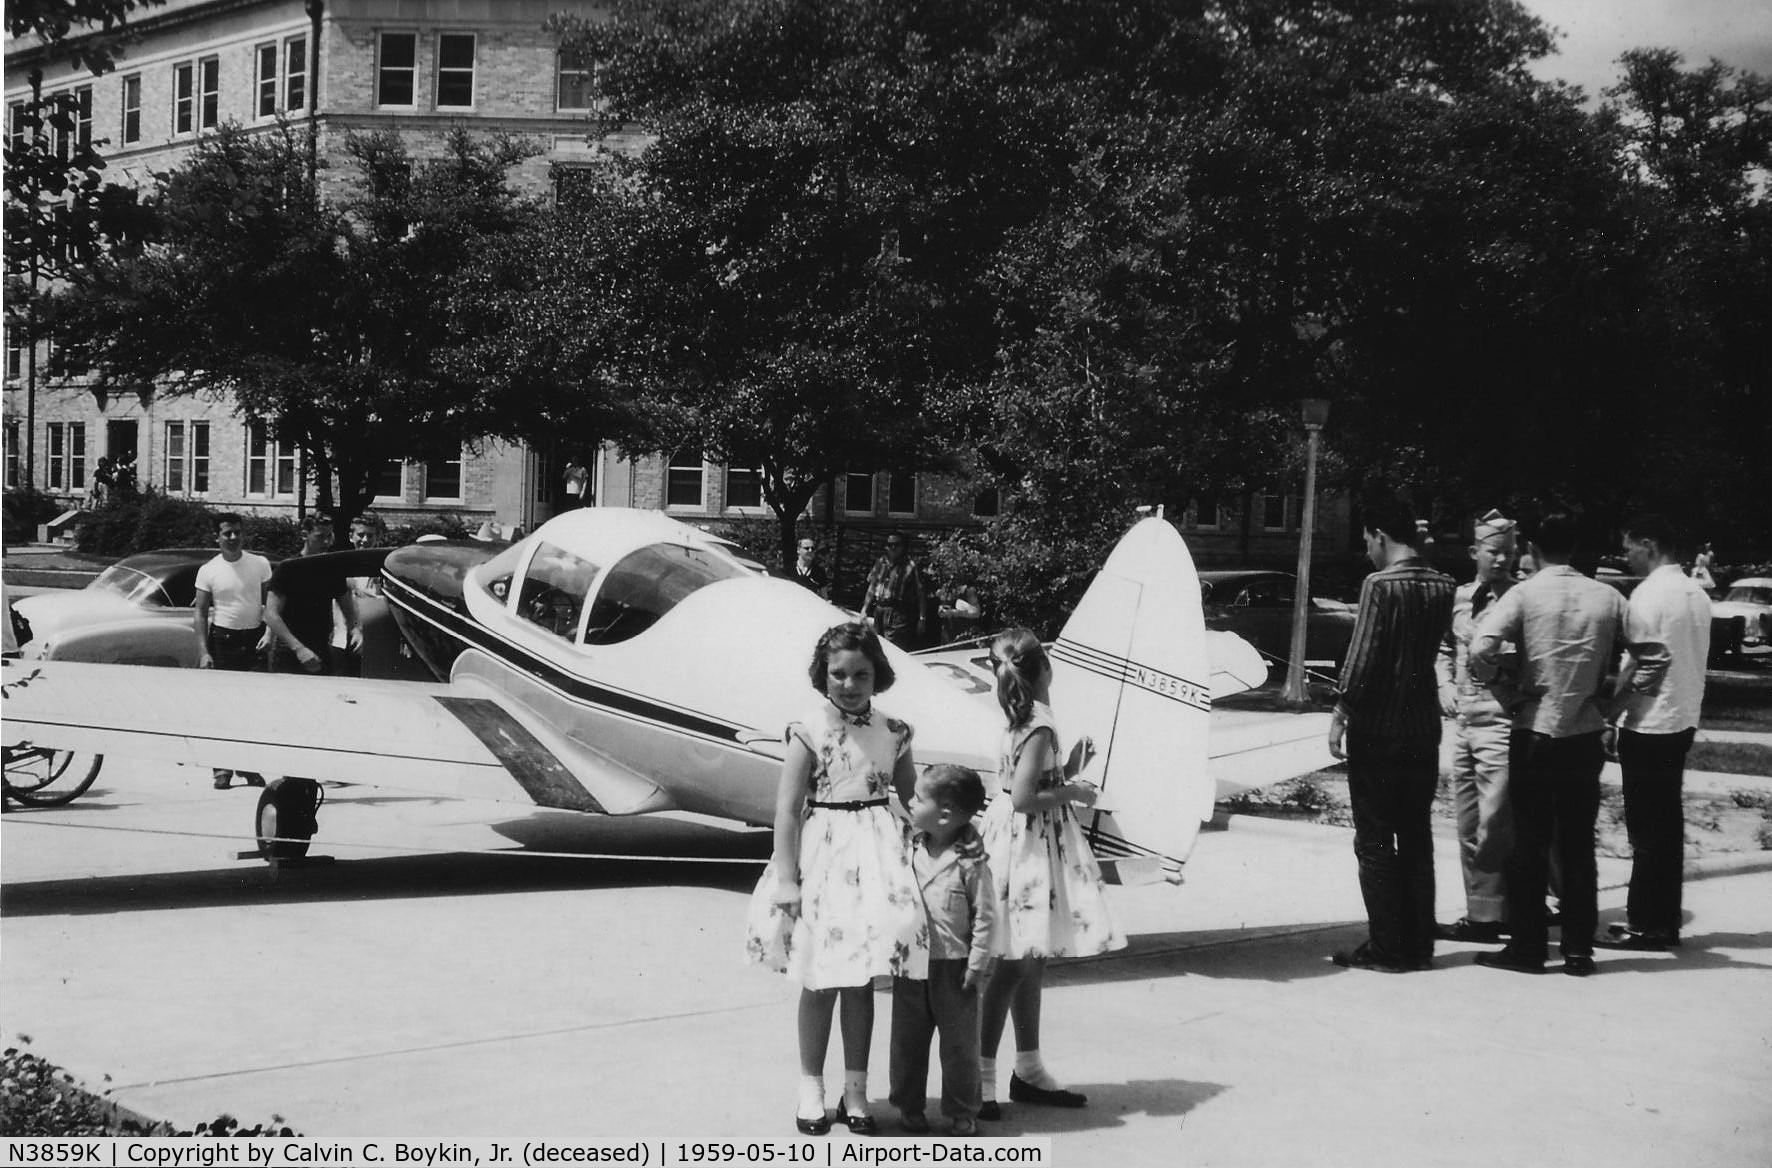 N3859K, 1948 Temco GC-1B Swift C/N 3559, Boykin children on campus at Texas A&M in front of Guion Hall and across from Hart Hall  on Mothers Day, ca. 1959. Plane was part of an Open House exhibit.